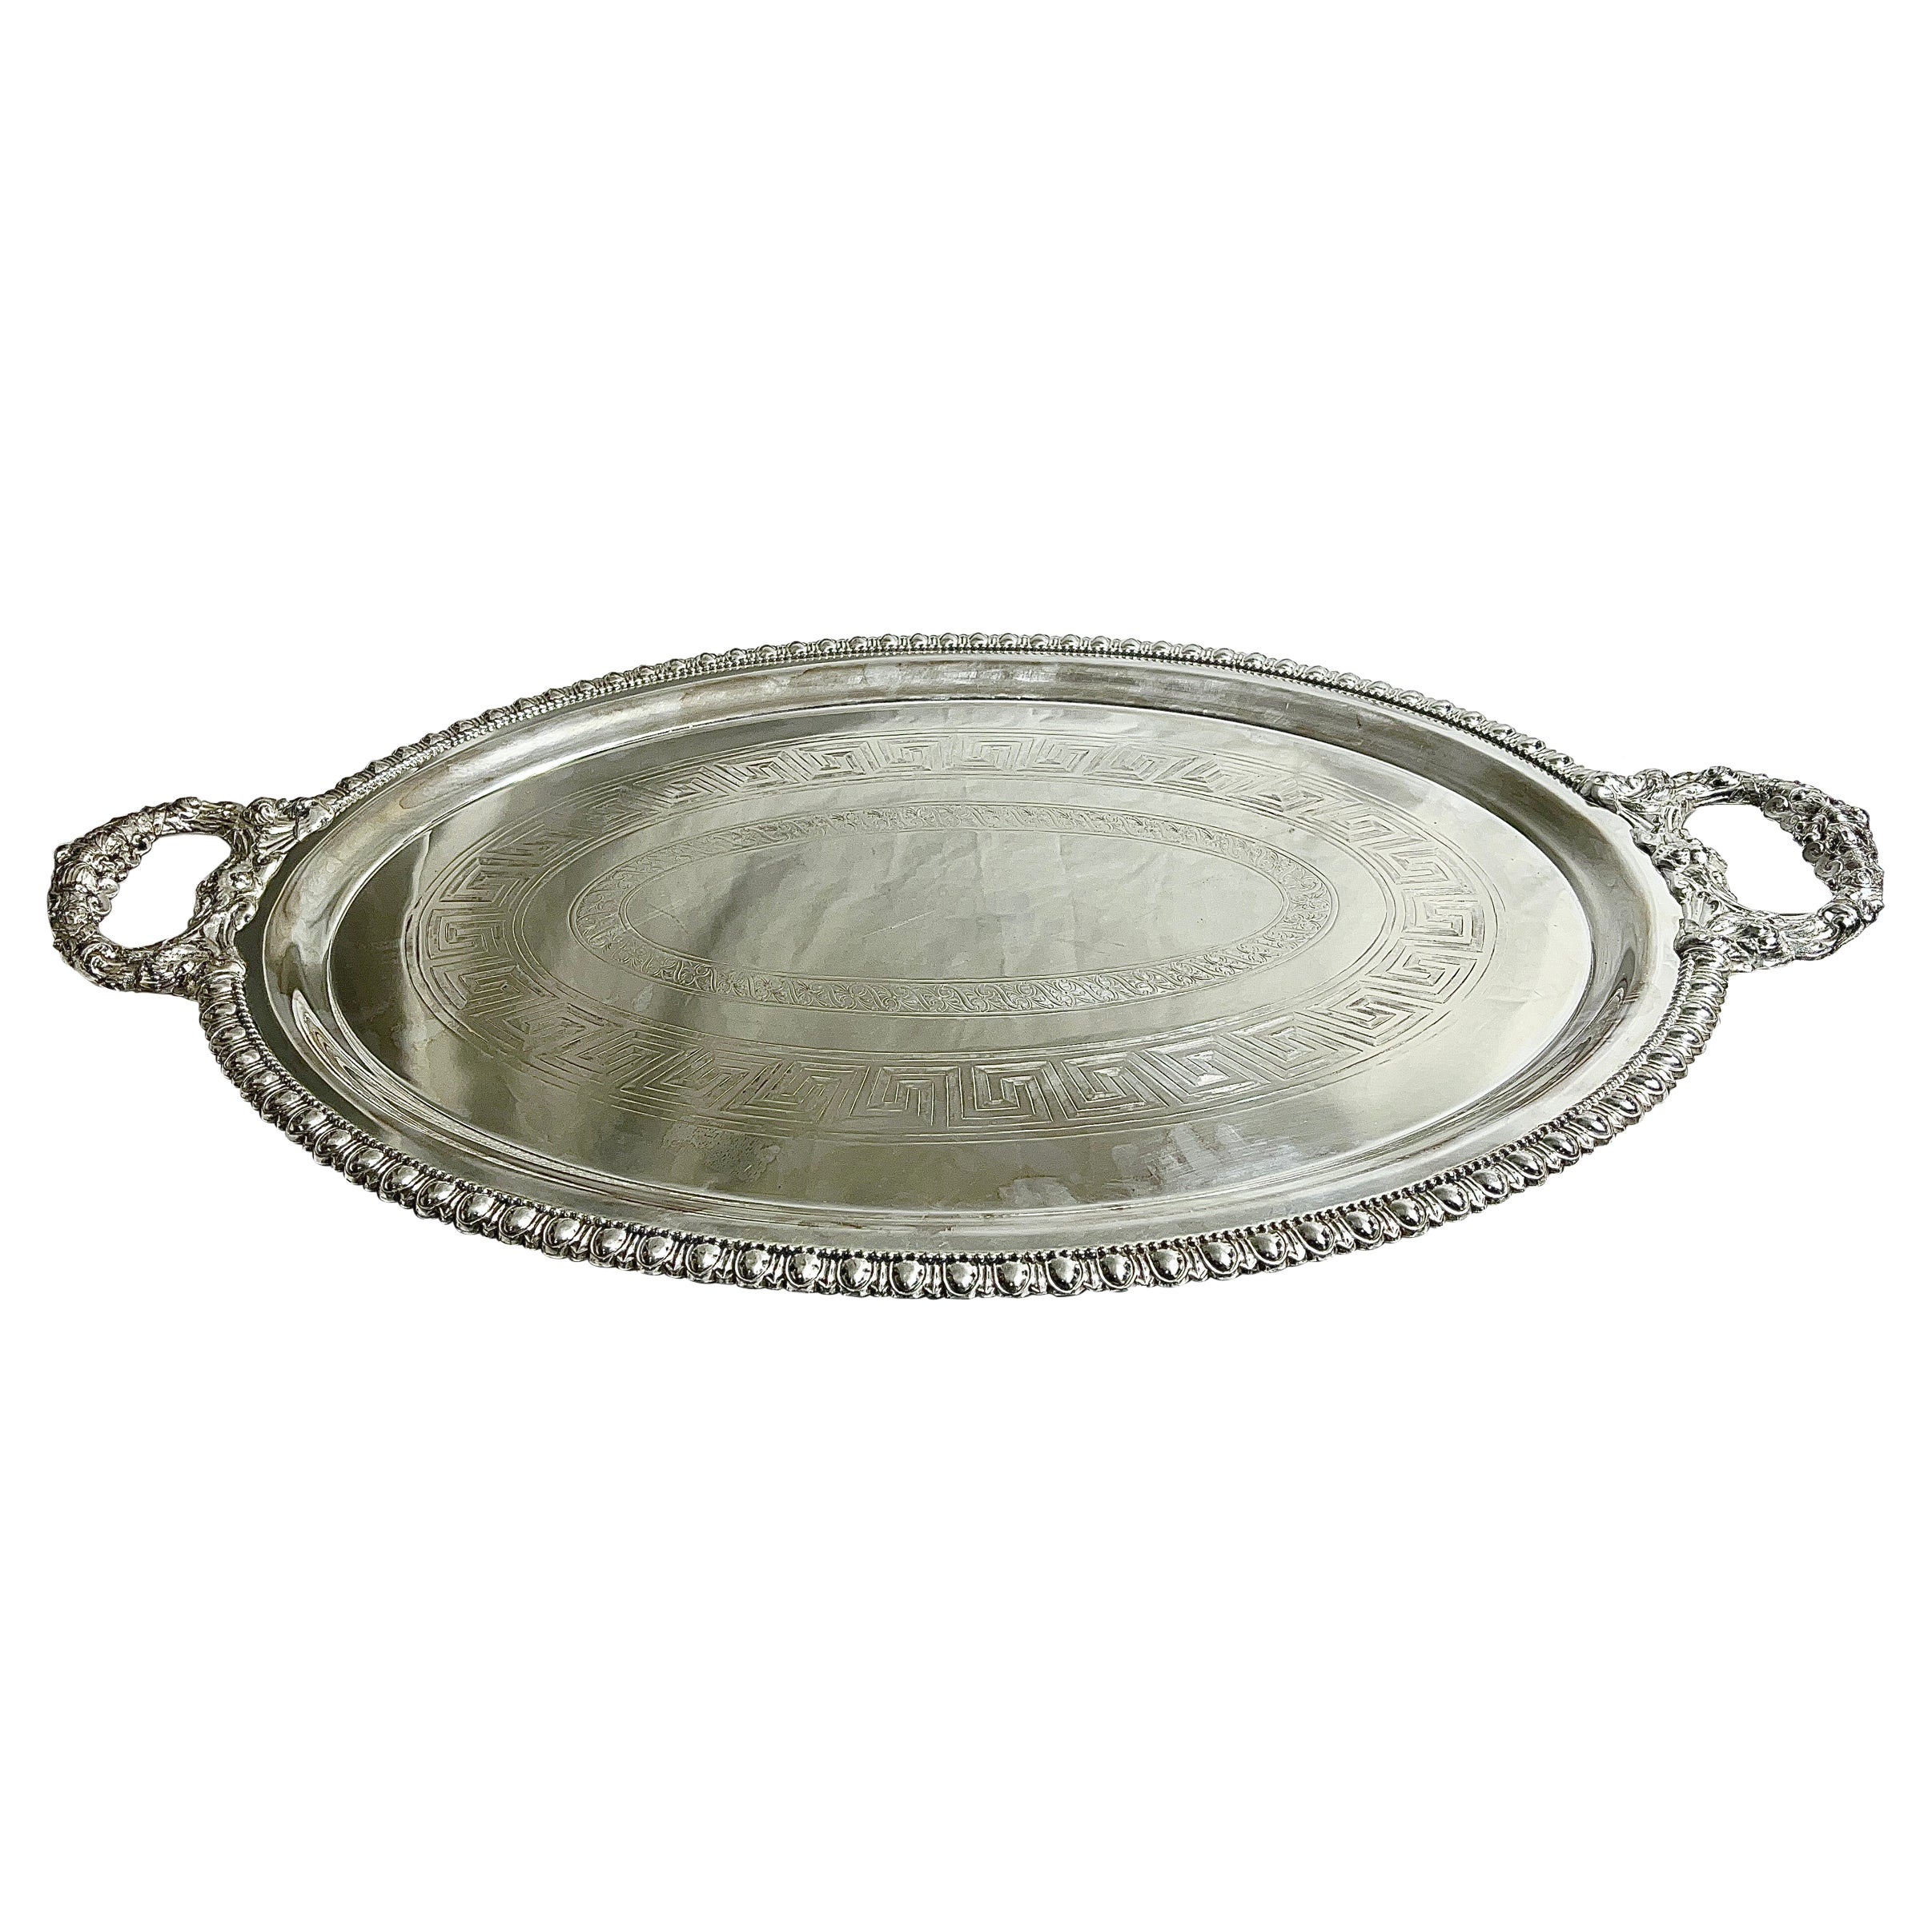 Antique English Sheffield Silver Plate Tray Signed "Mappin and Webb" Circa 1890. For Sale